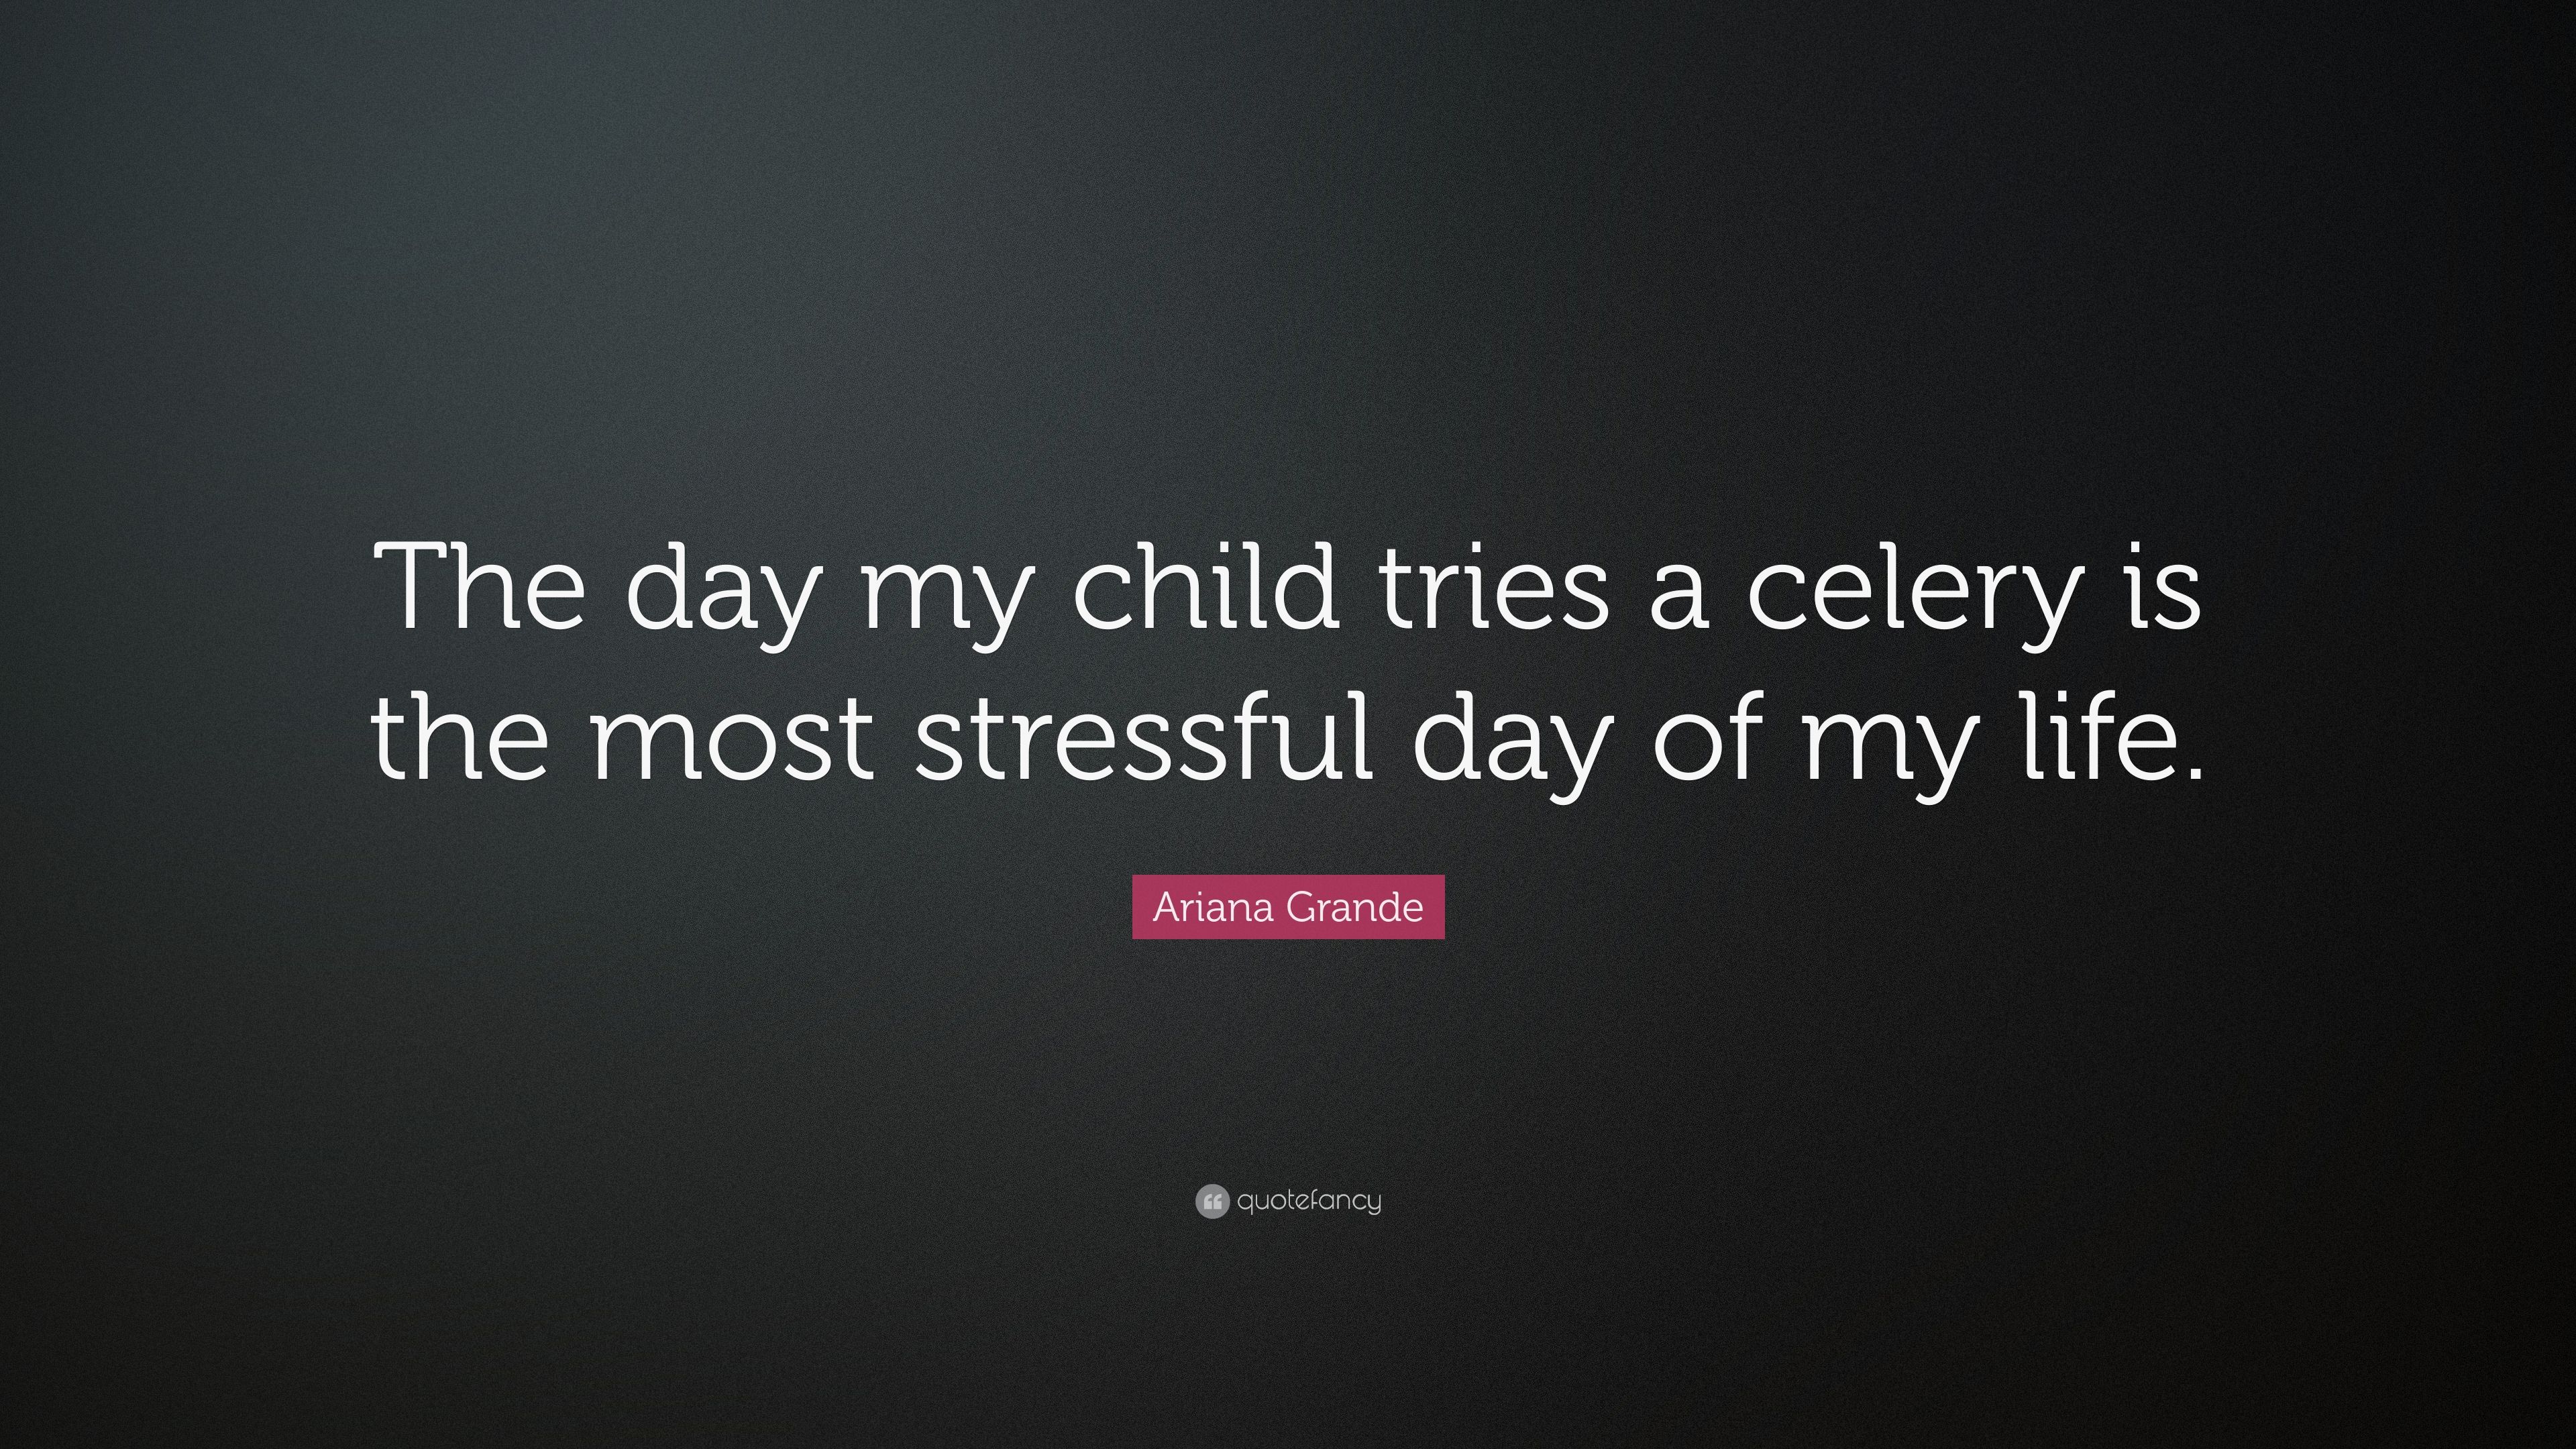 Ariana Grande Quote: “The day my child tries a celery is